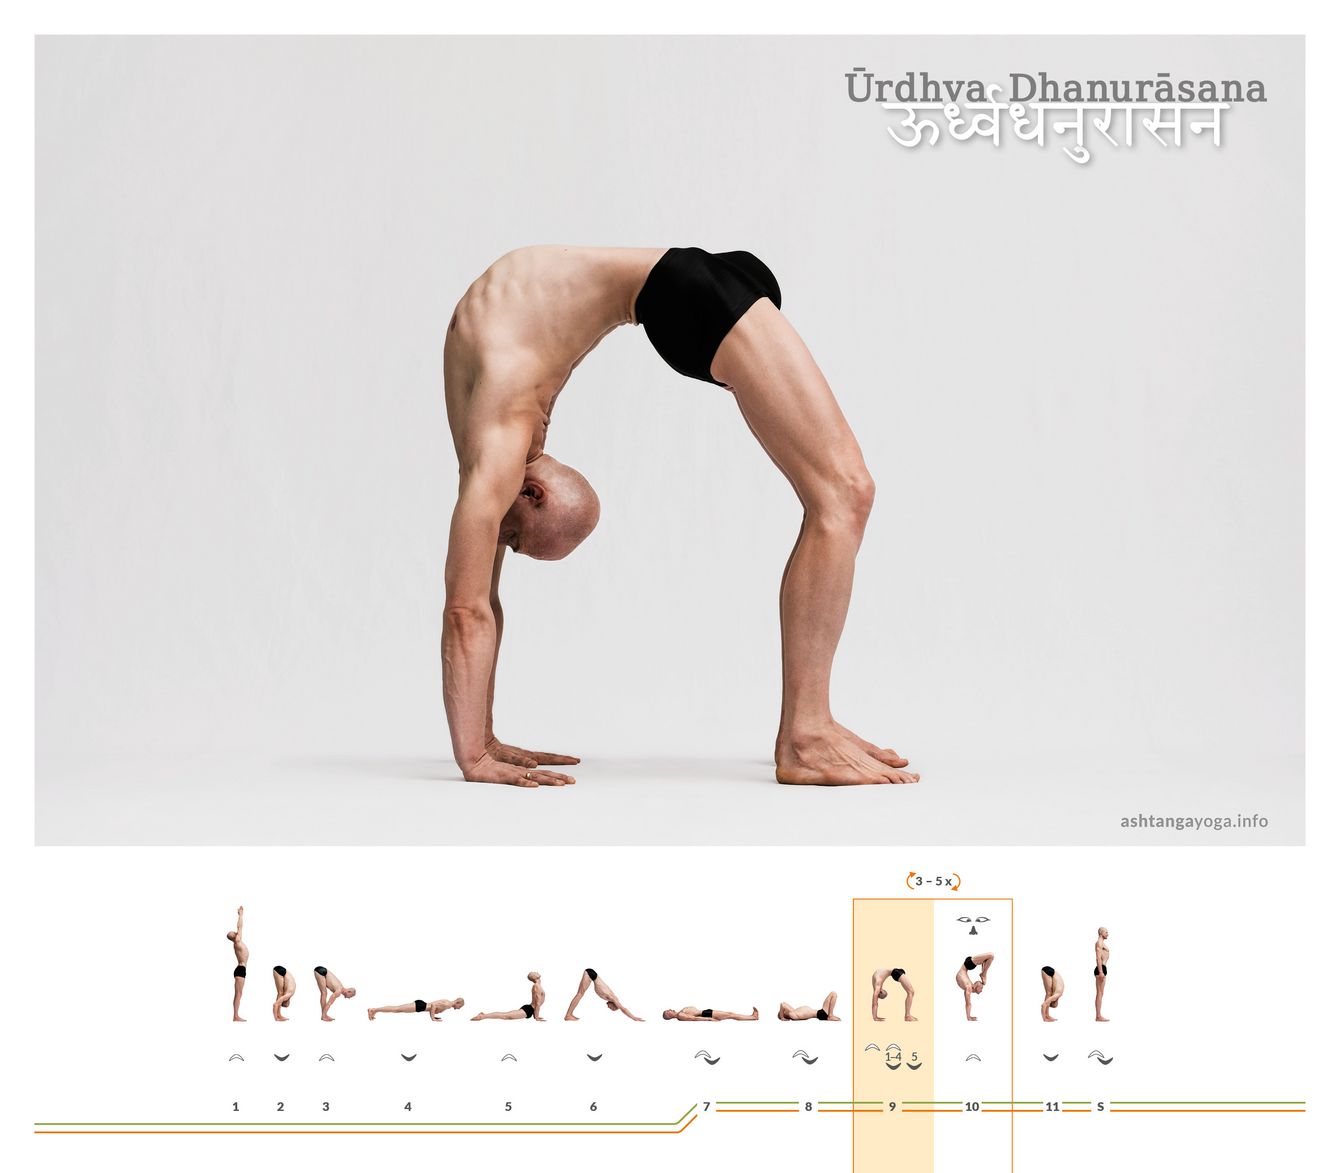 Urdhva Dhanurasana is a backbend with an upward-facing front body, defined only by the touch of hands and feet to the ground - an upward-facing bow.